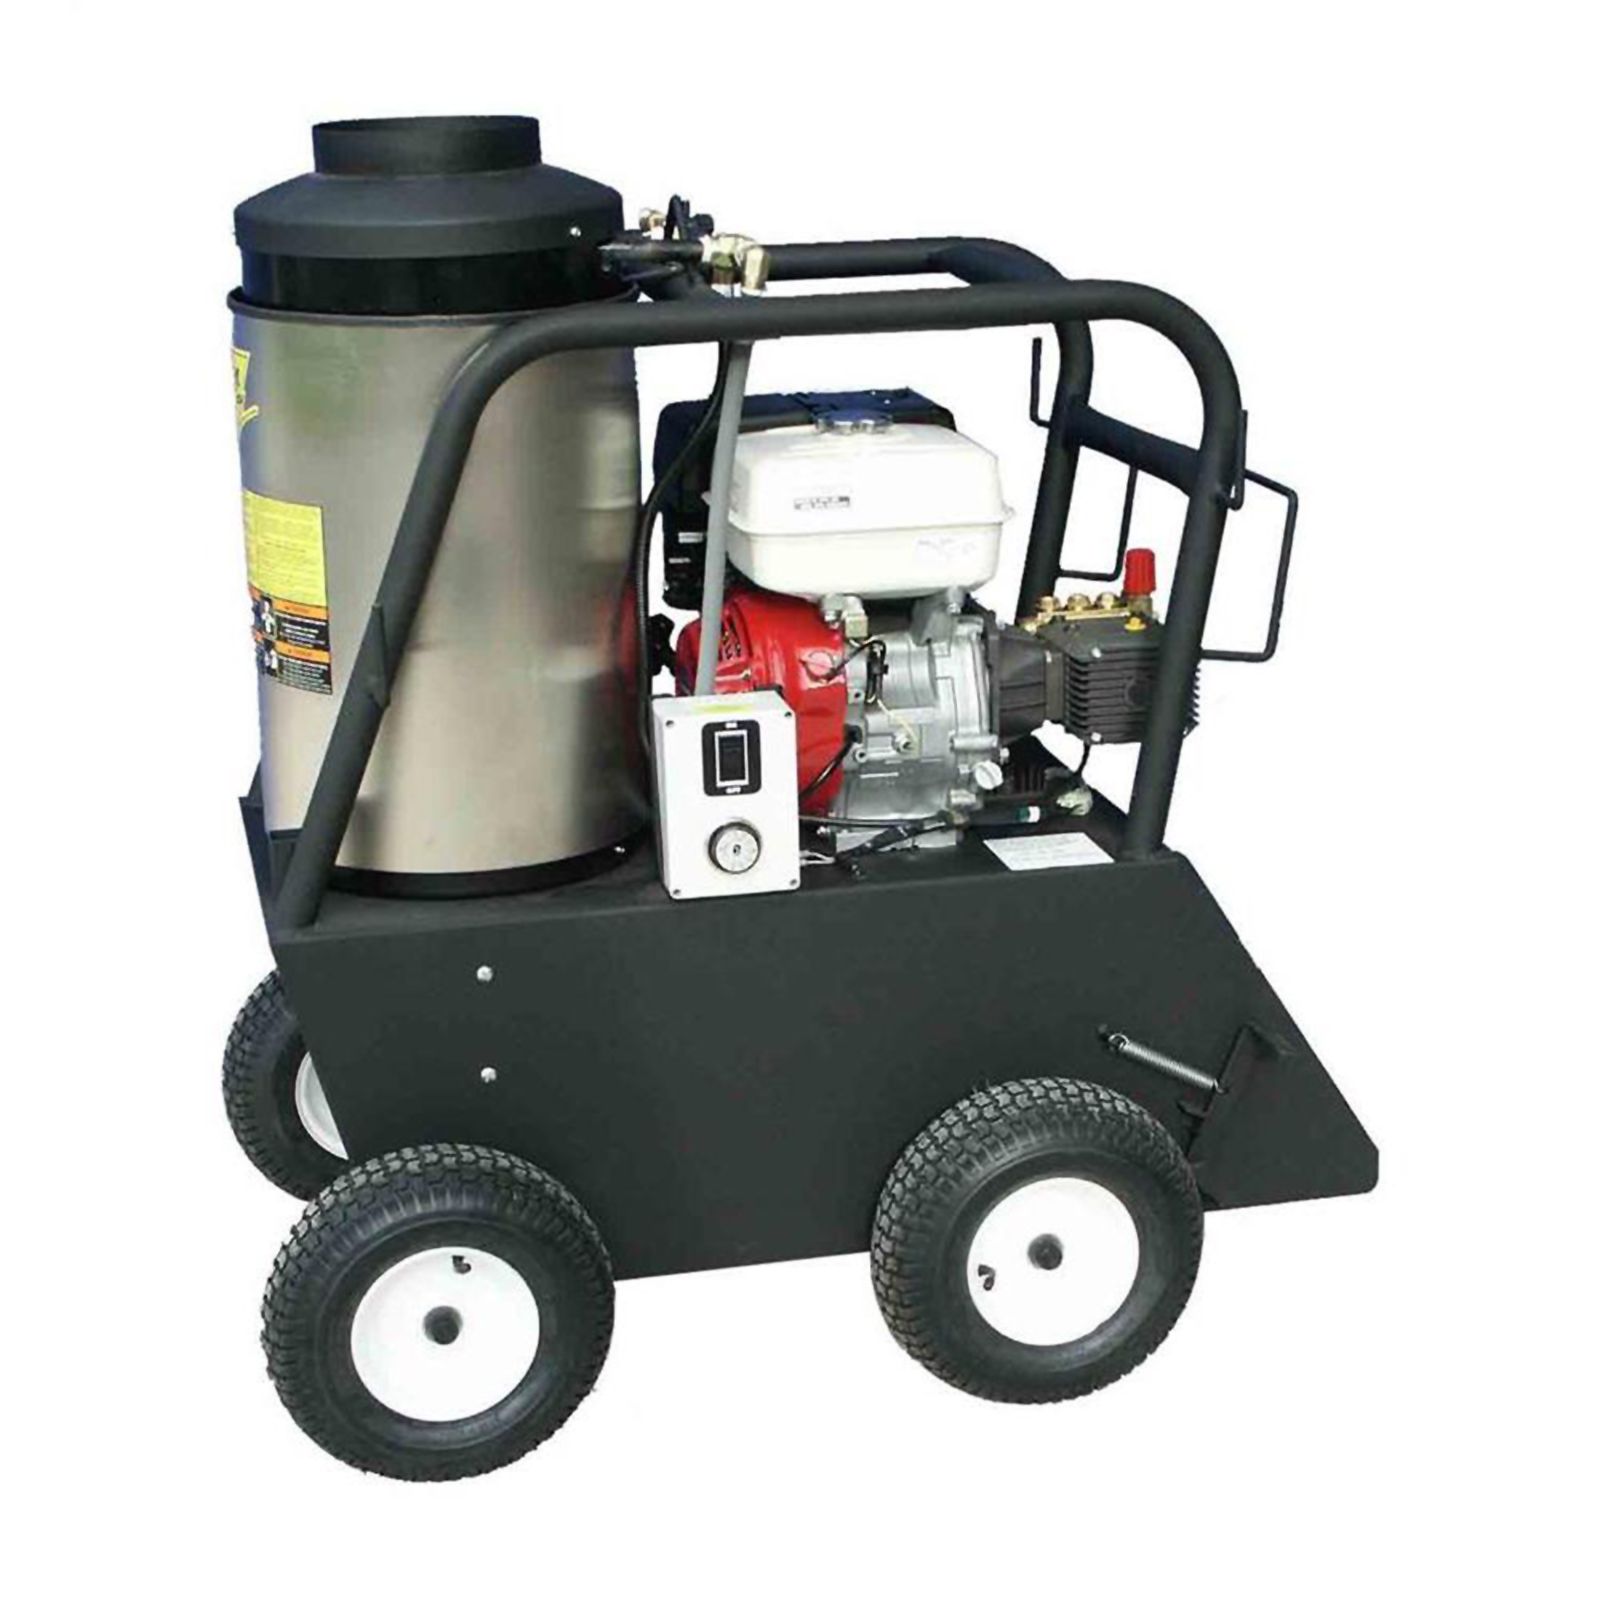 Cam Spray 3030QH 3000psi Q Series Oil Fired Hot Water Pressure Washer